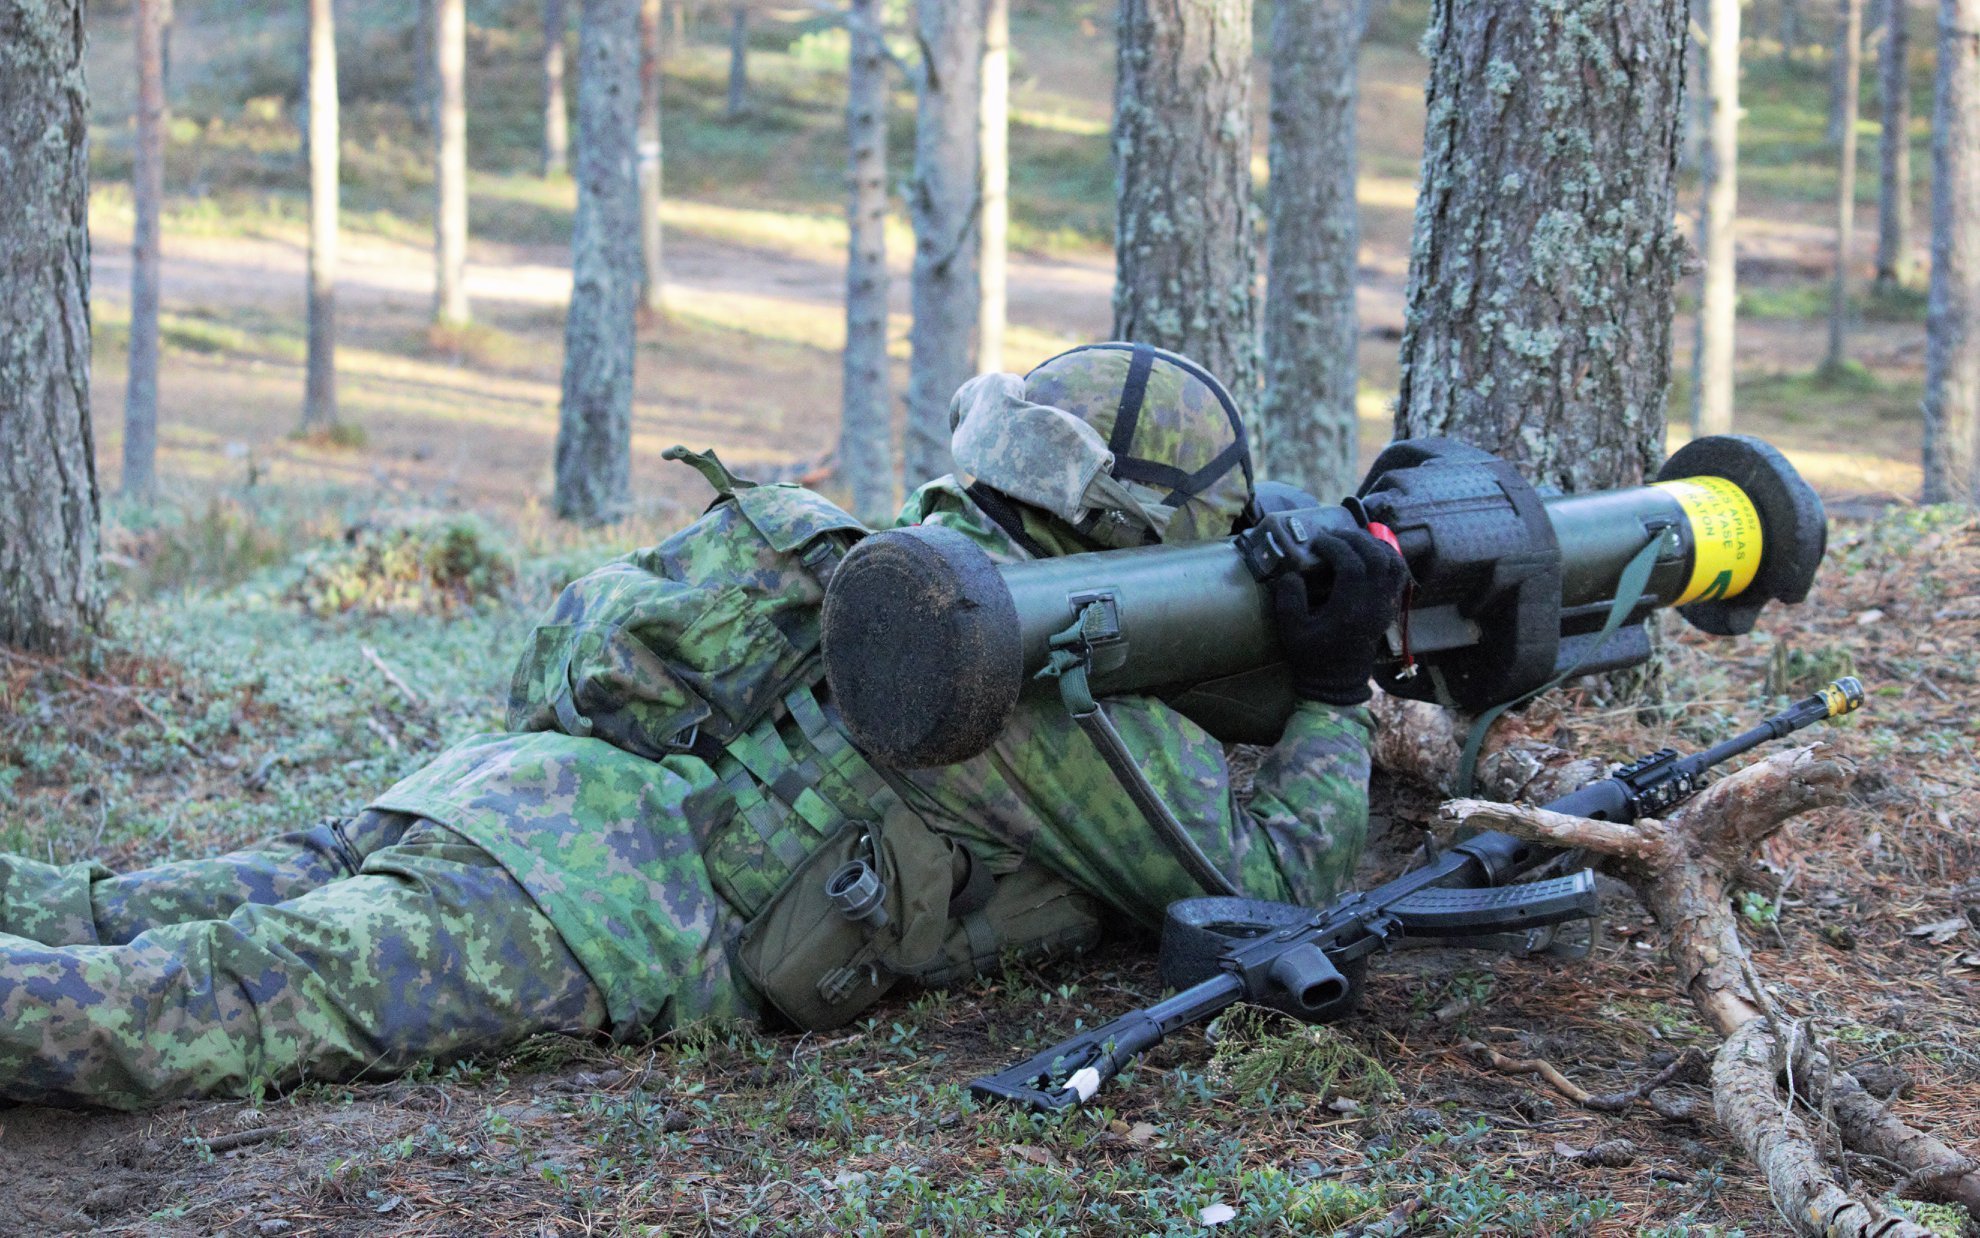 AFU uses French APILAS disposable grenade launchers with a range of up to 500 metres